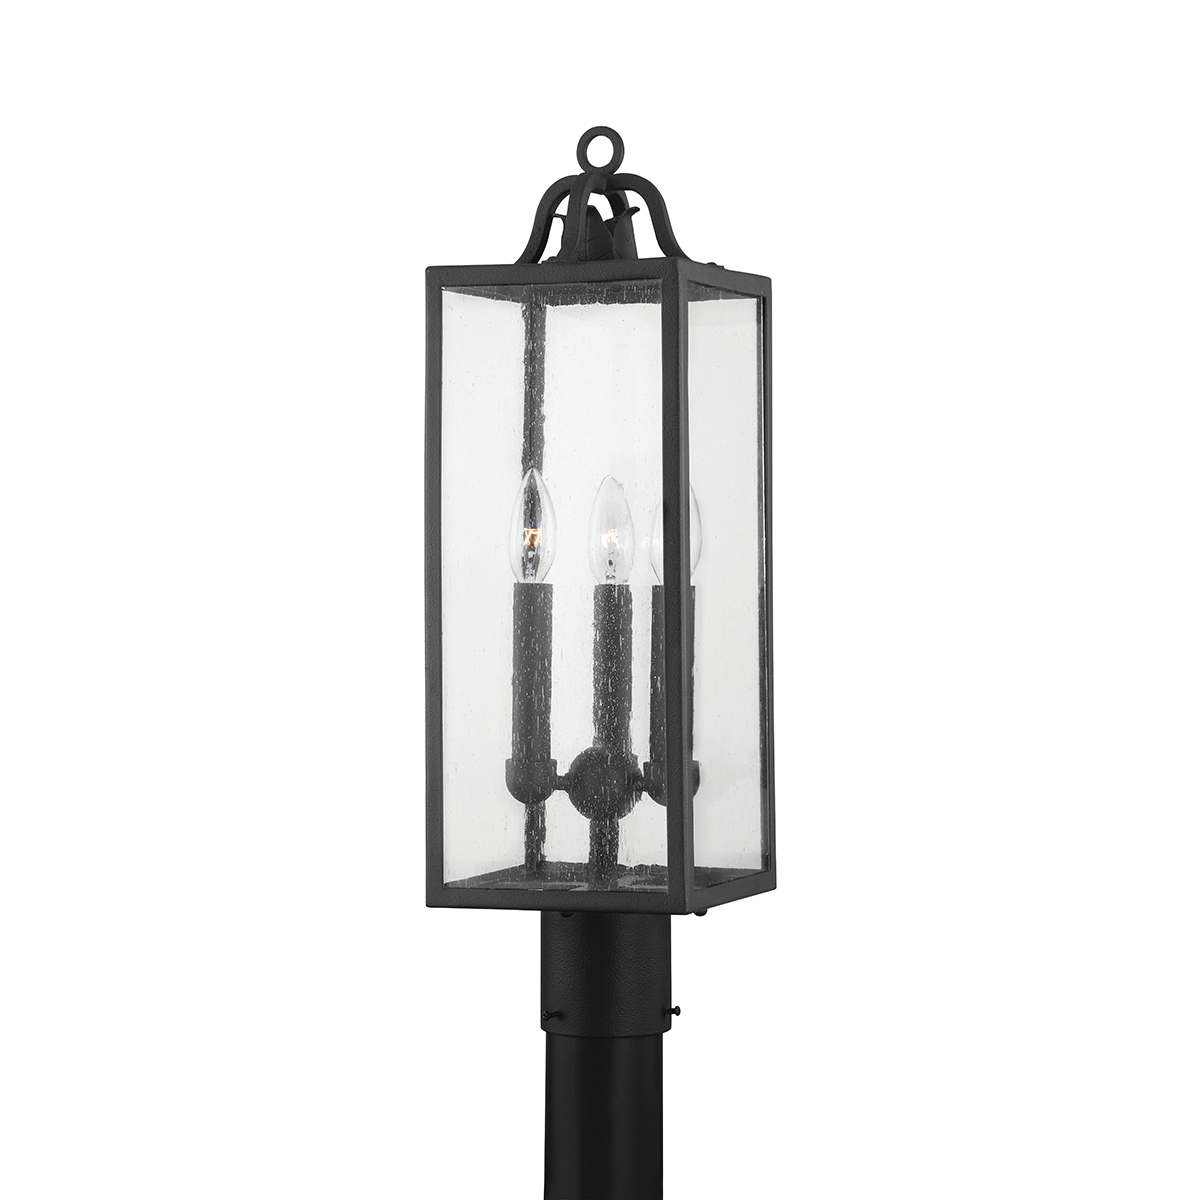 Troy CAIDEN 3 LIGHT EXTERIOR POST P2067 Outdoor l Post/Pier Mounts Troy Lighting FORGED IRON  